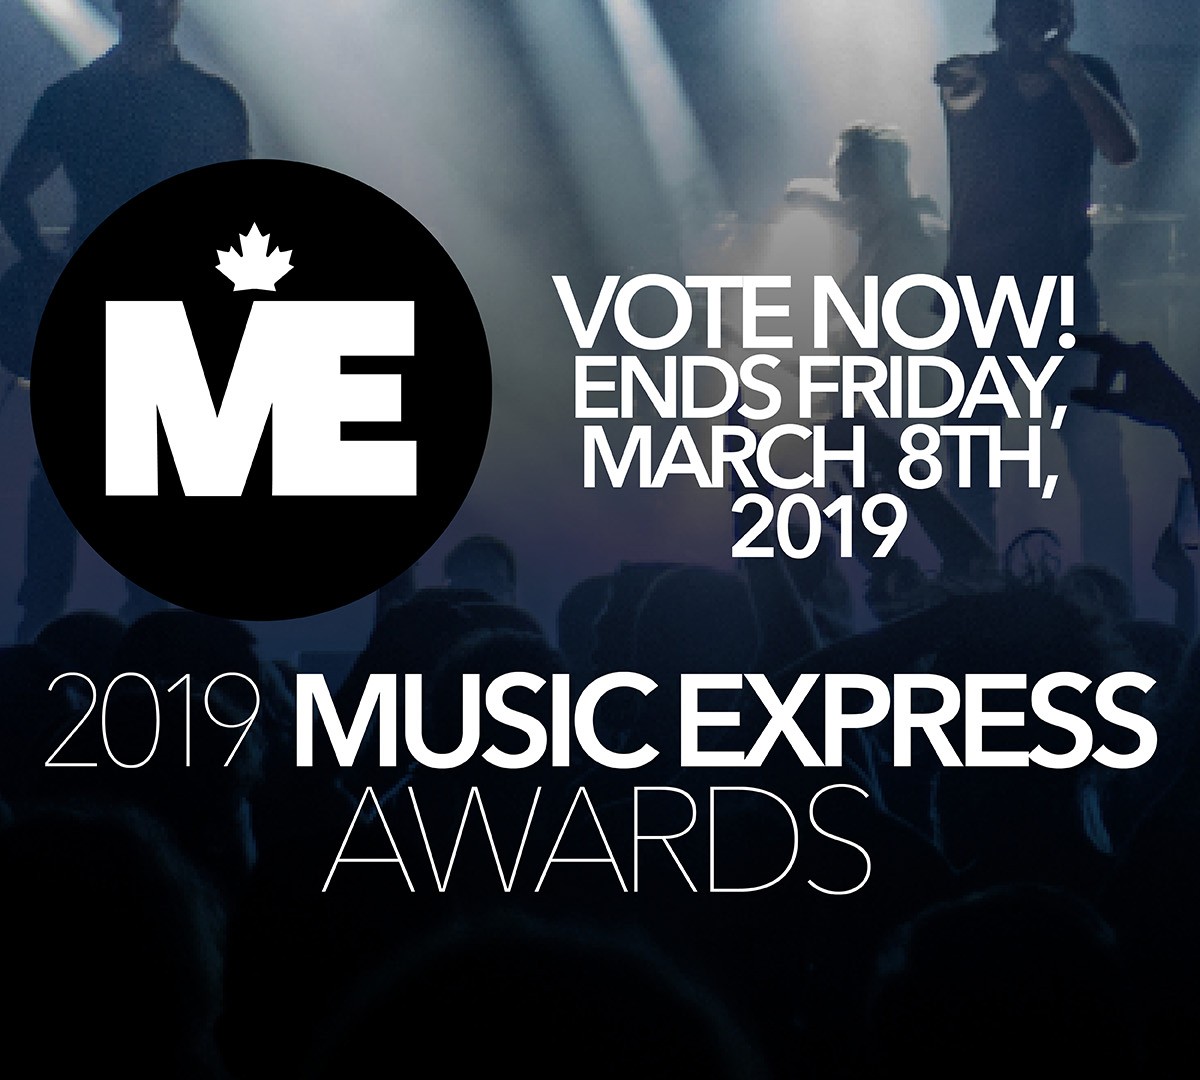 Polls are closed! The Music Express Awards